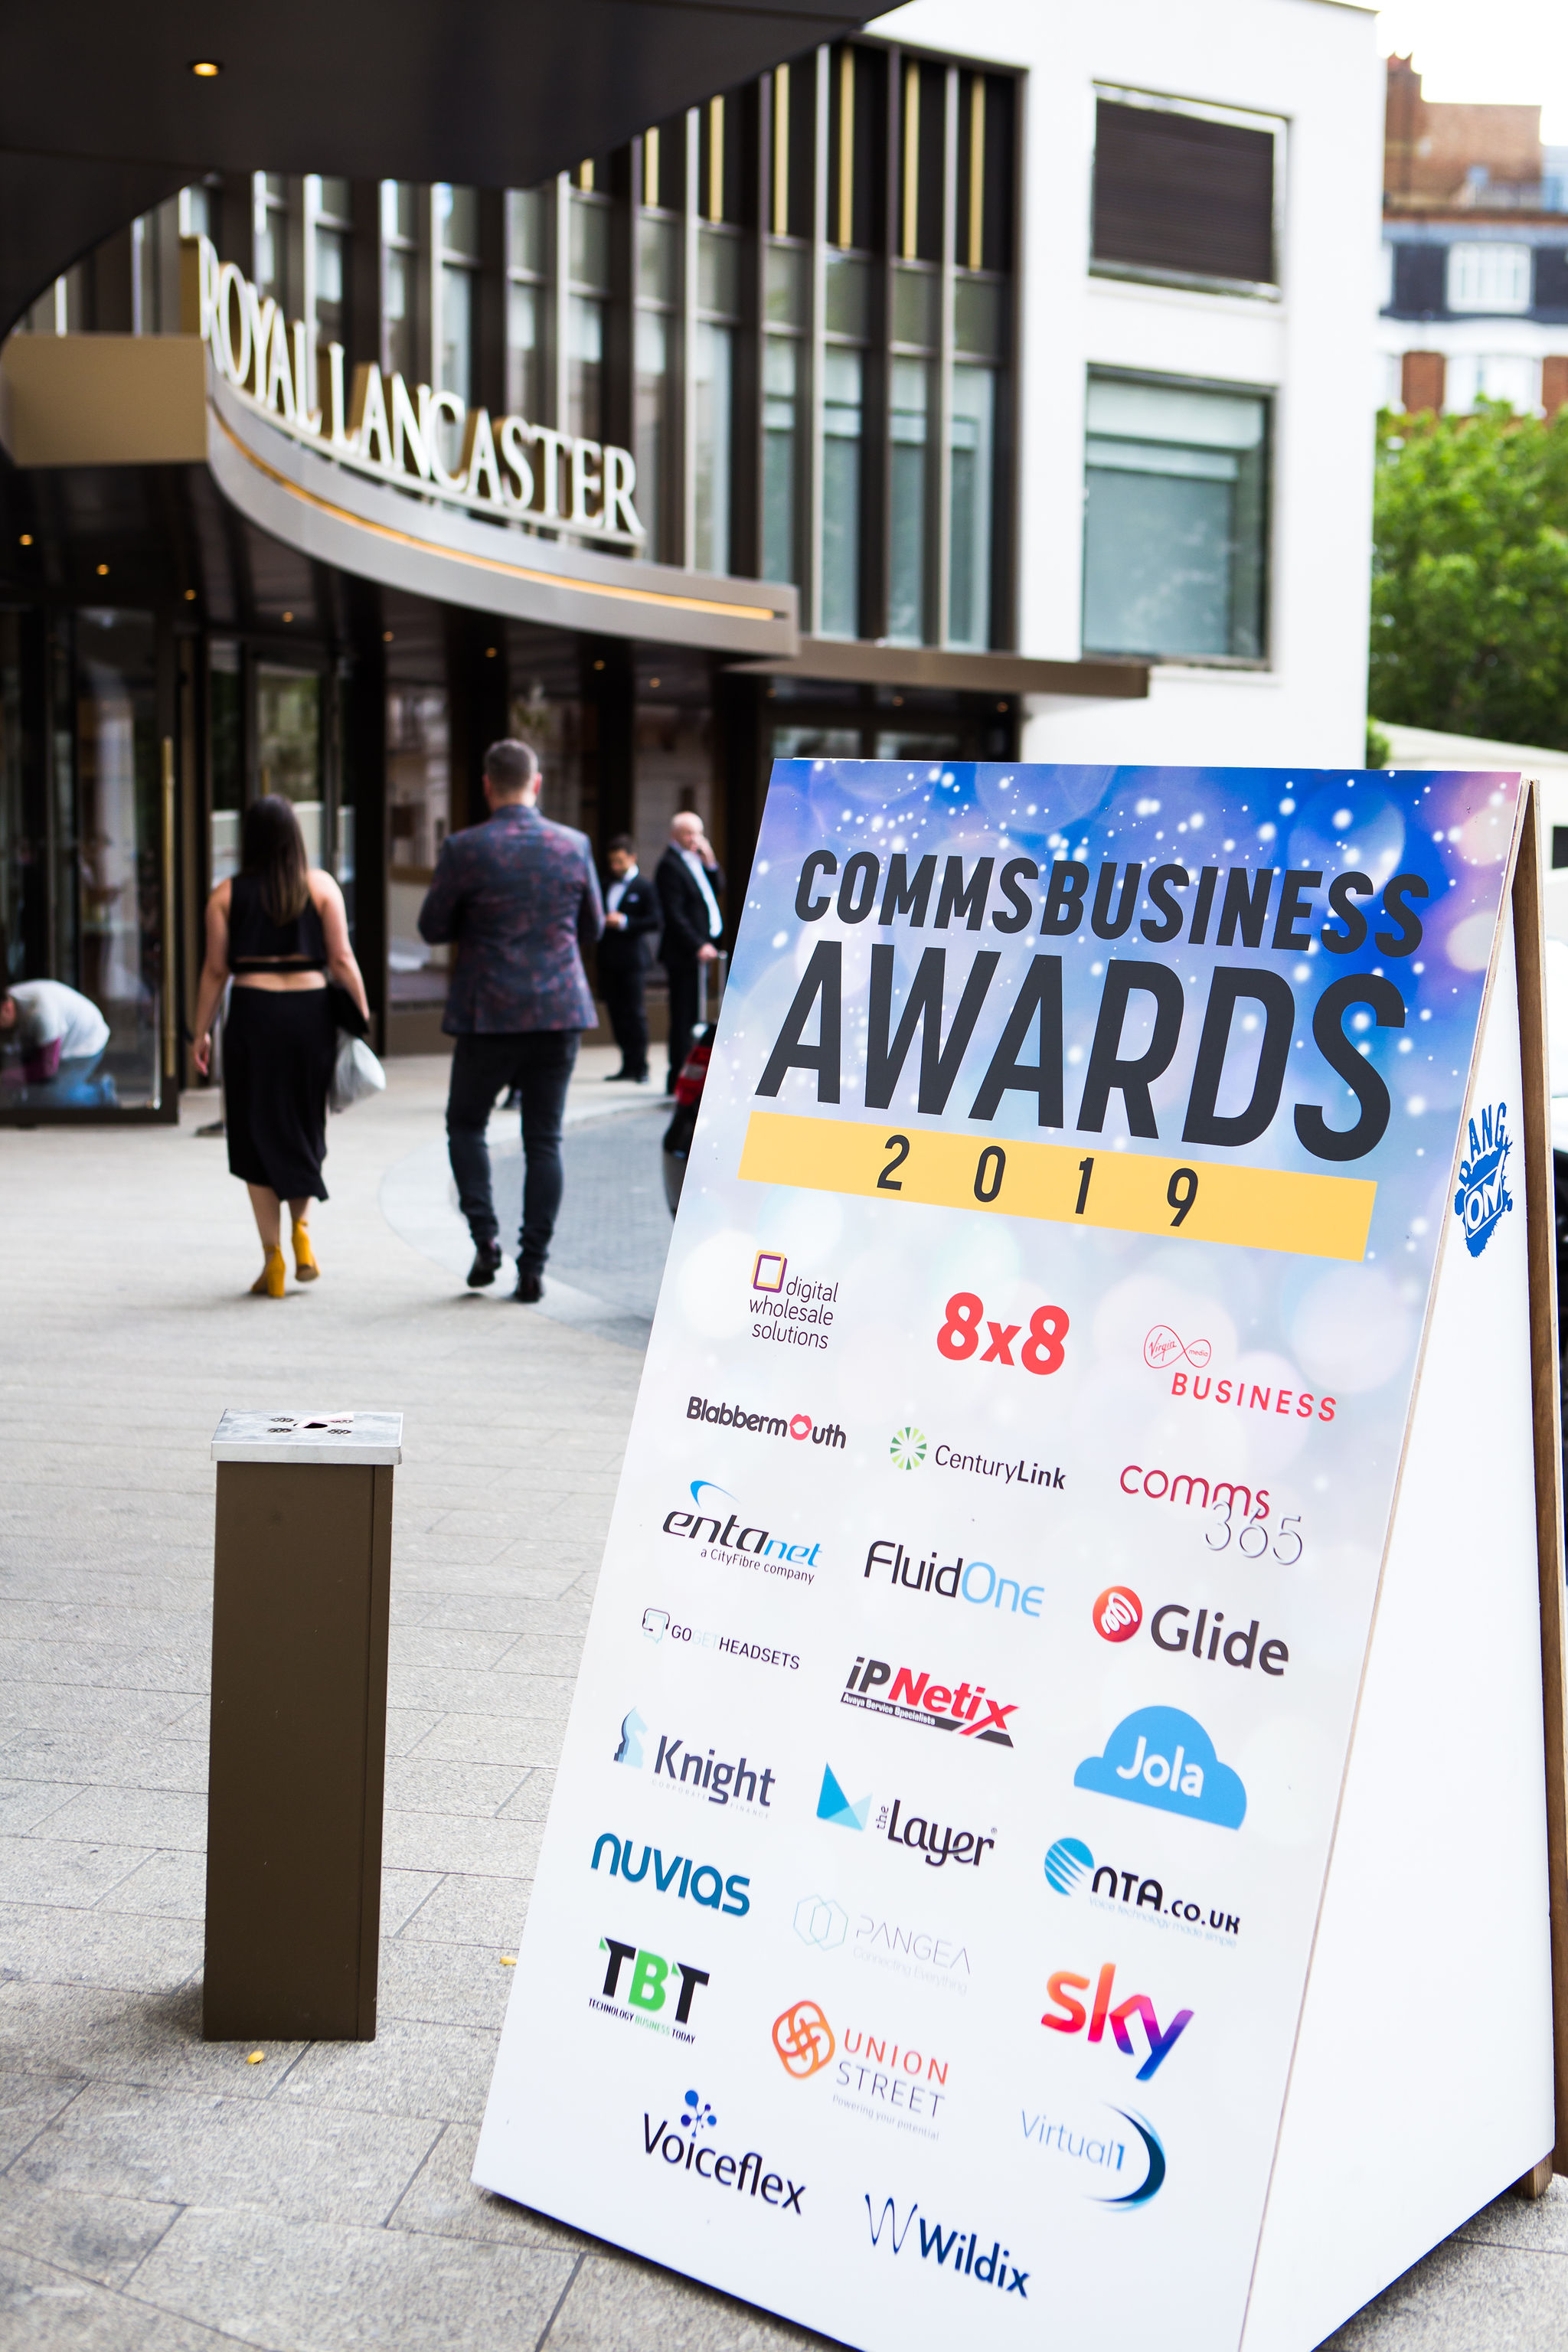 2019 Comms Business Awards at the Royal Lancaster, London